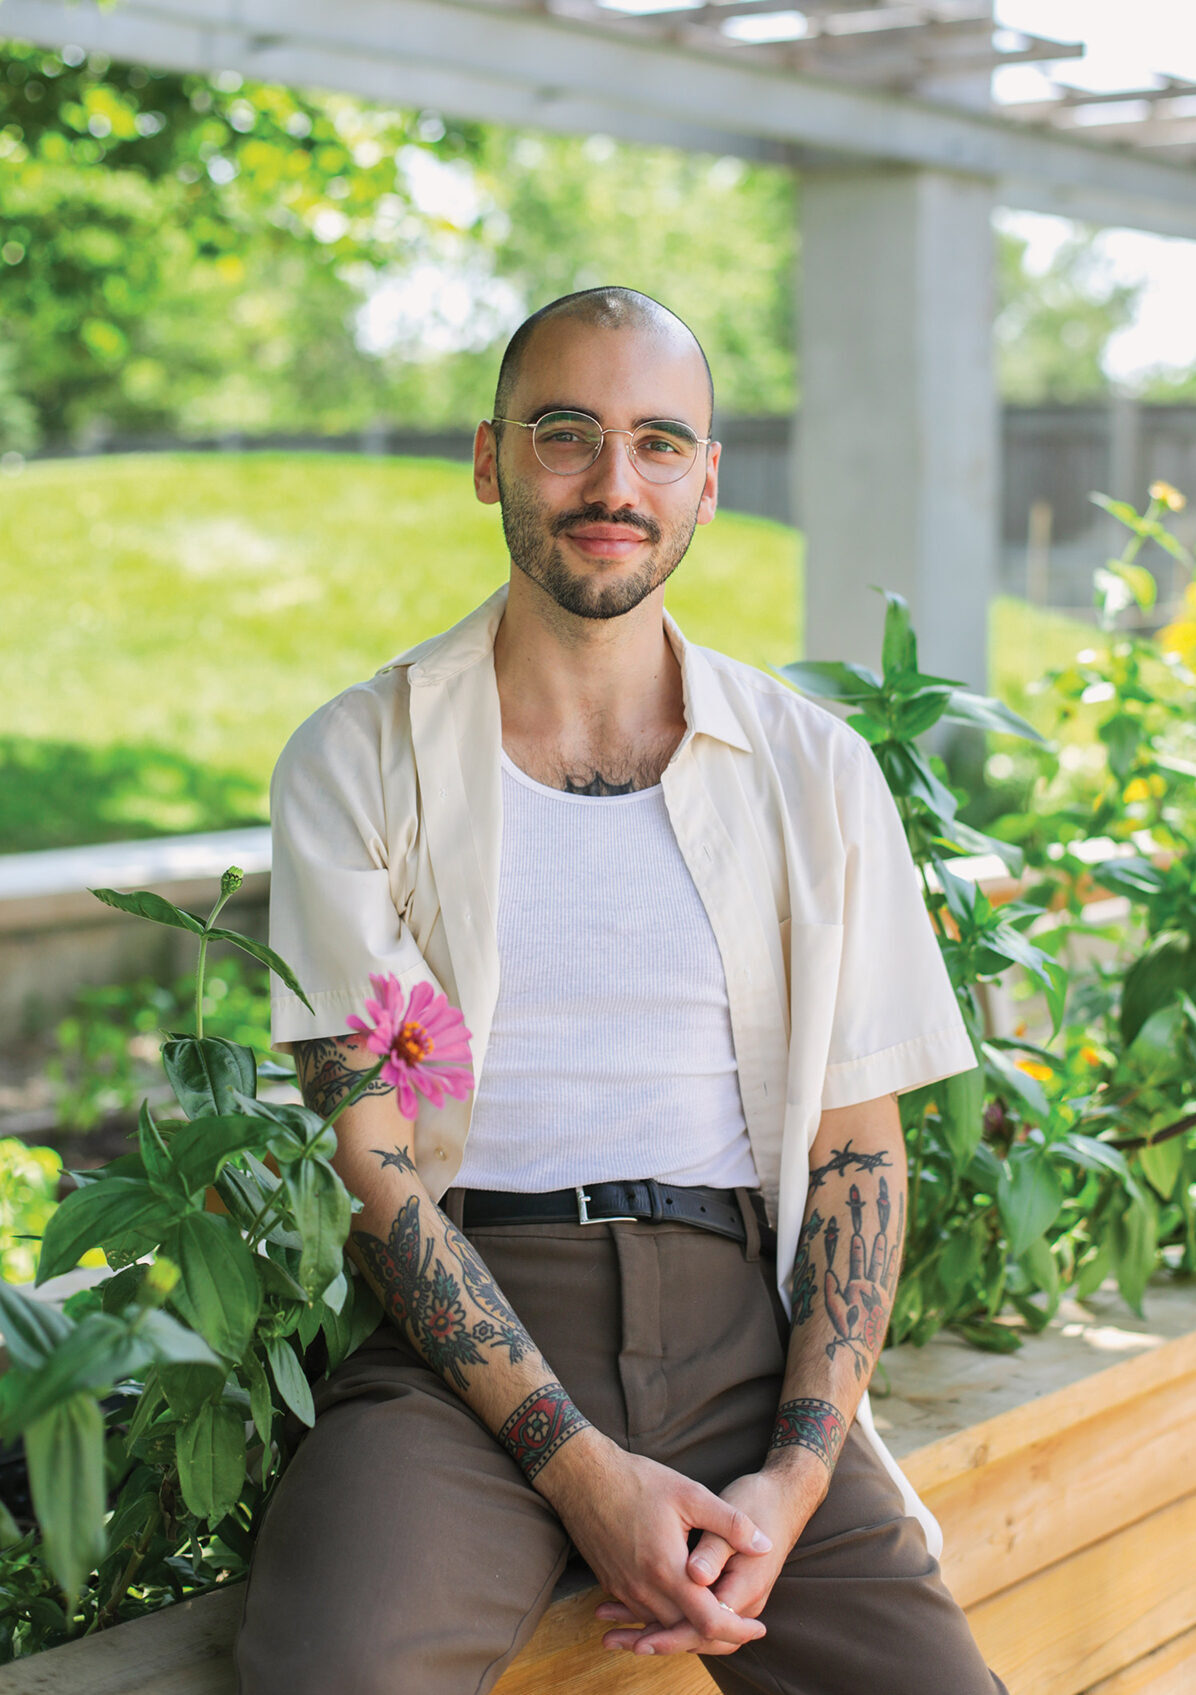 Outdoor photo of Cody Caetano in a white T-shirt under an off-white short-sleeved button-up shirt, revealing tattoos along his forearms. He is seated on a wooden bench with a flower bed.